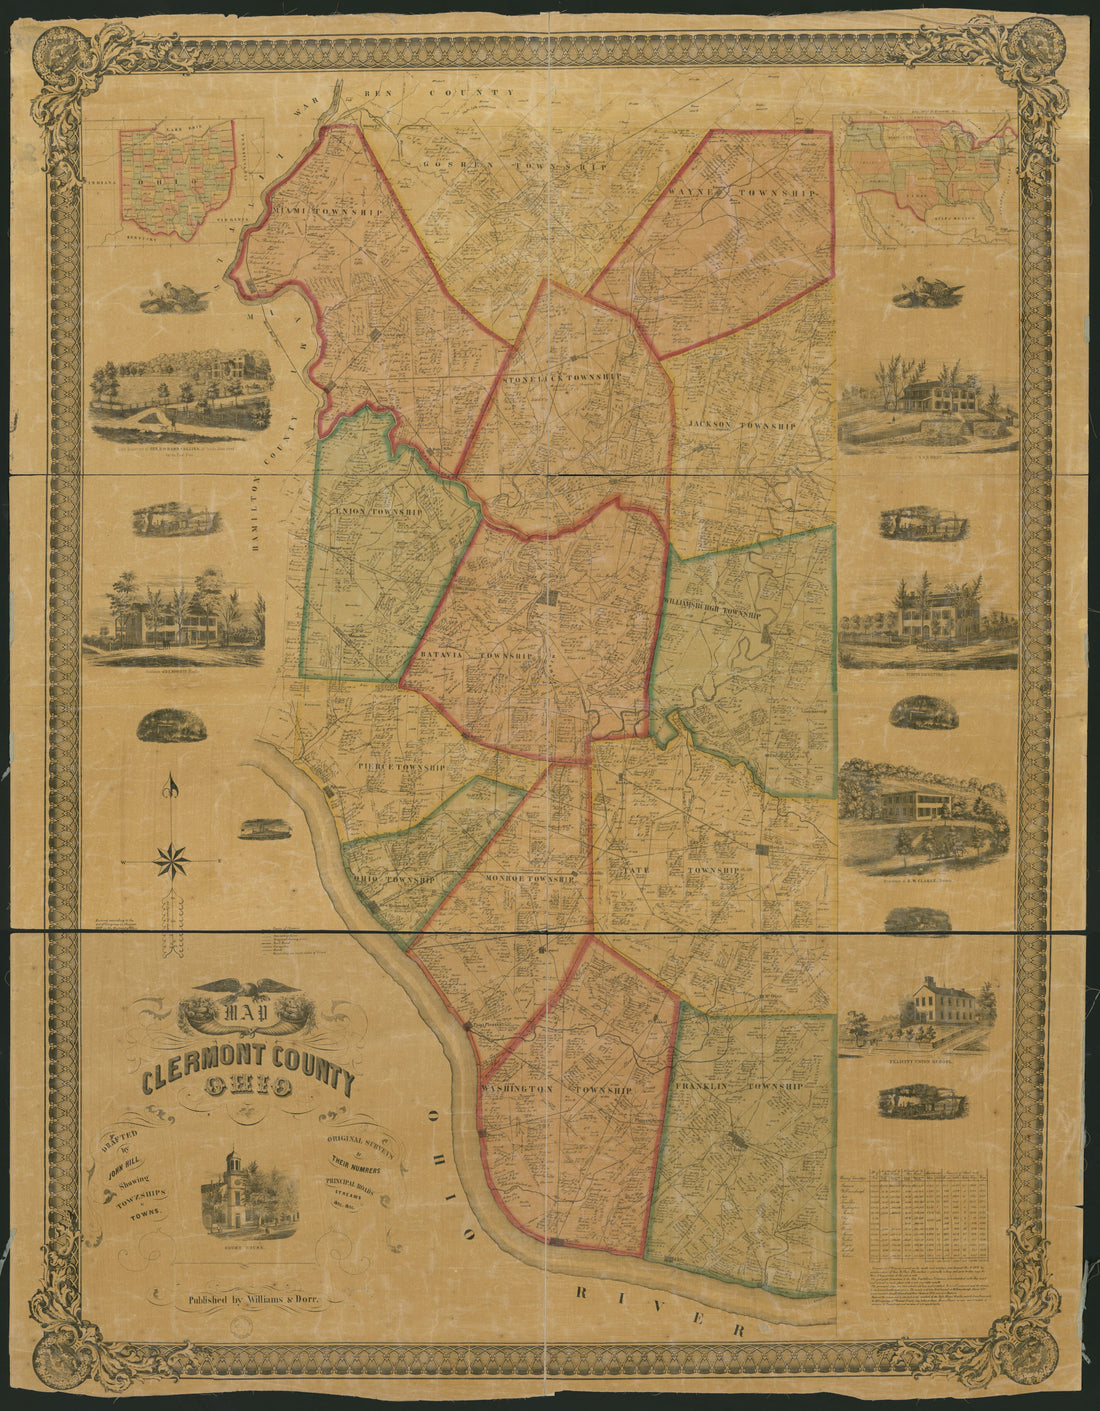 This old map of Map of Clermont County, Ohio from 1857 was created by John Hill in 1857